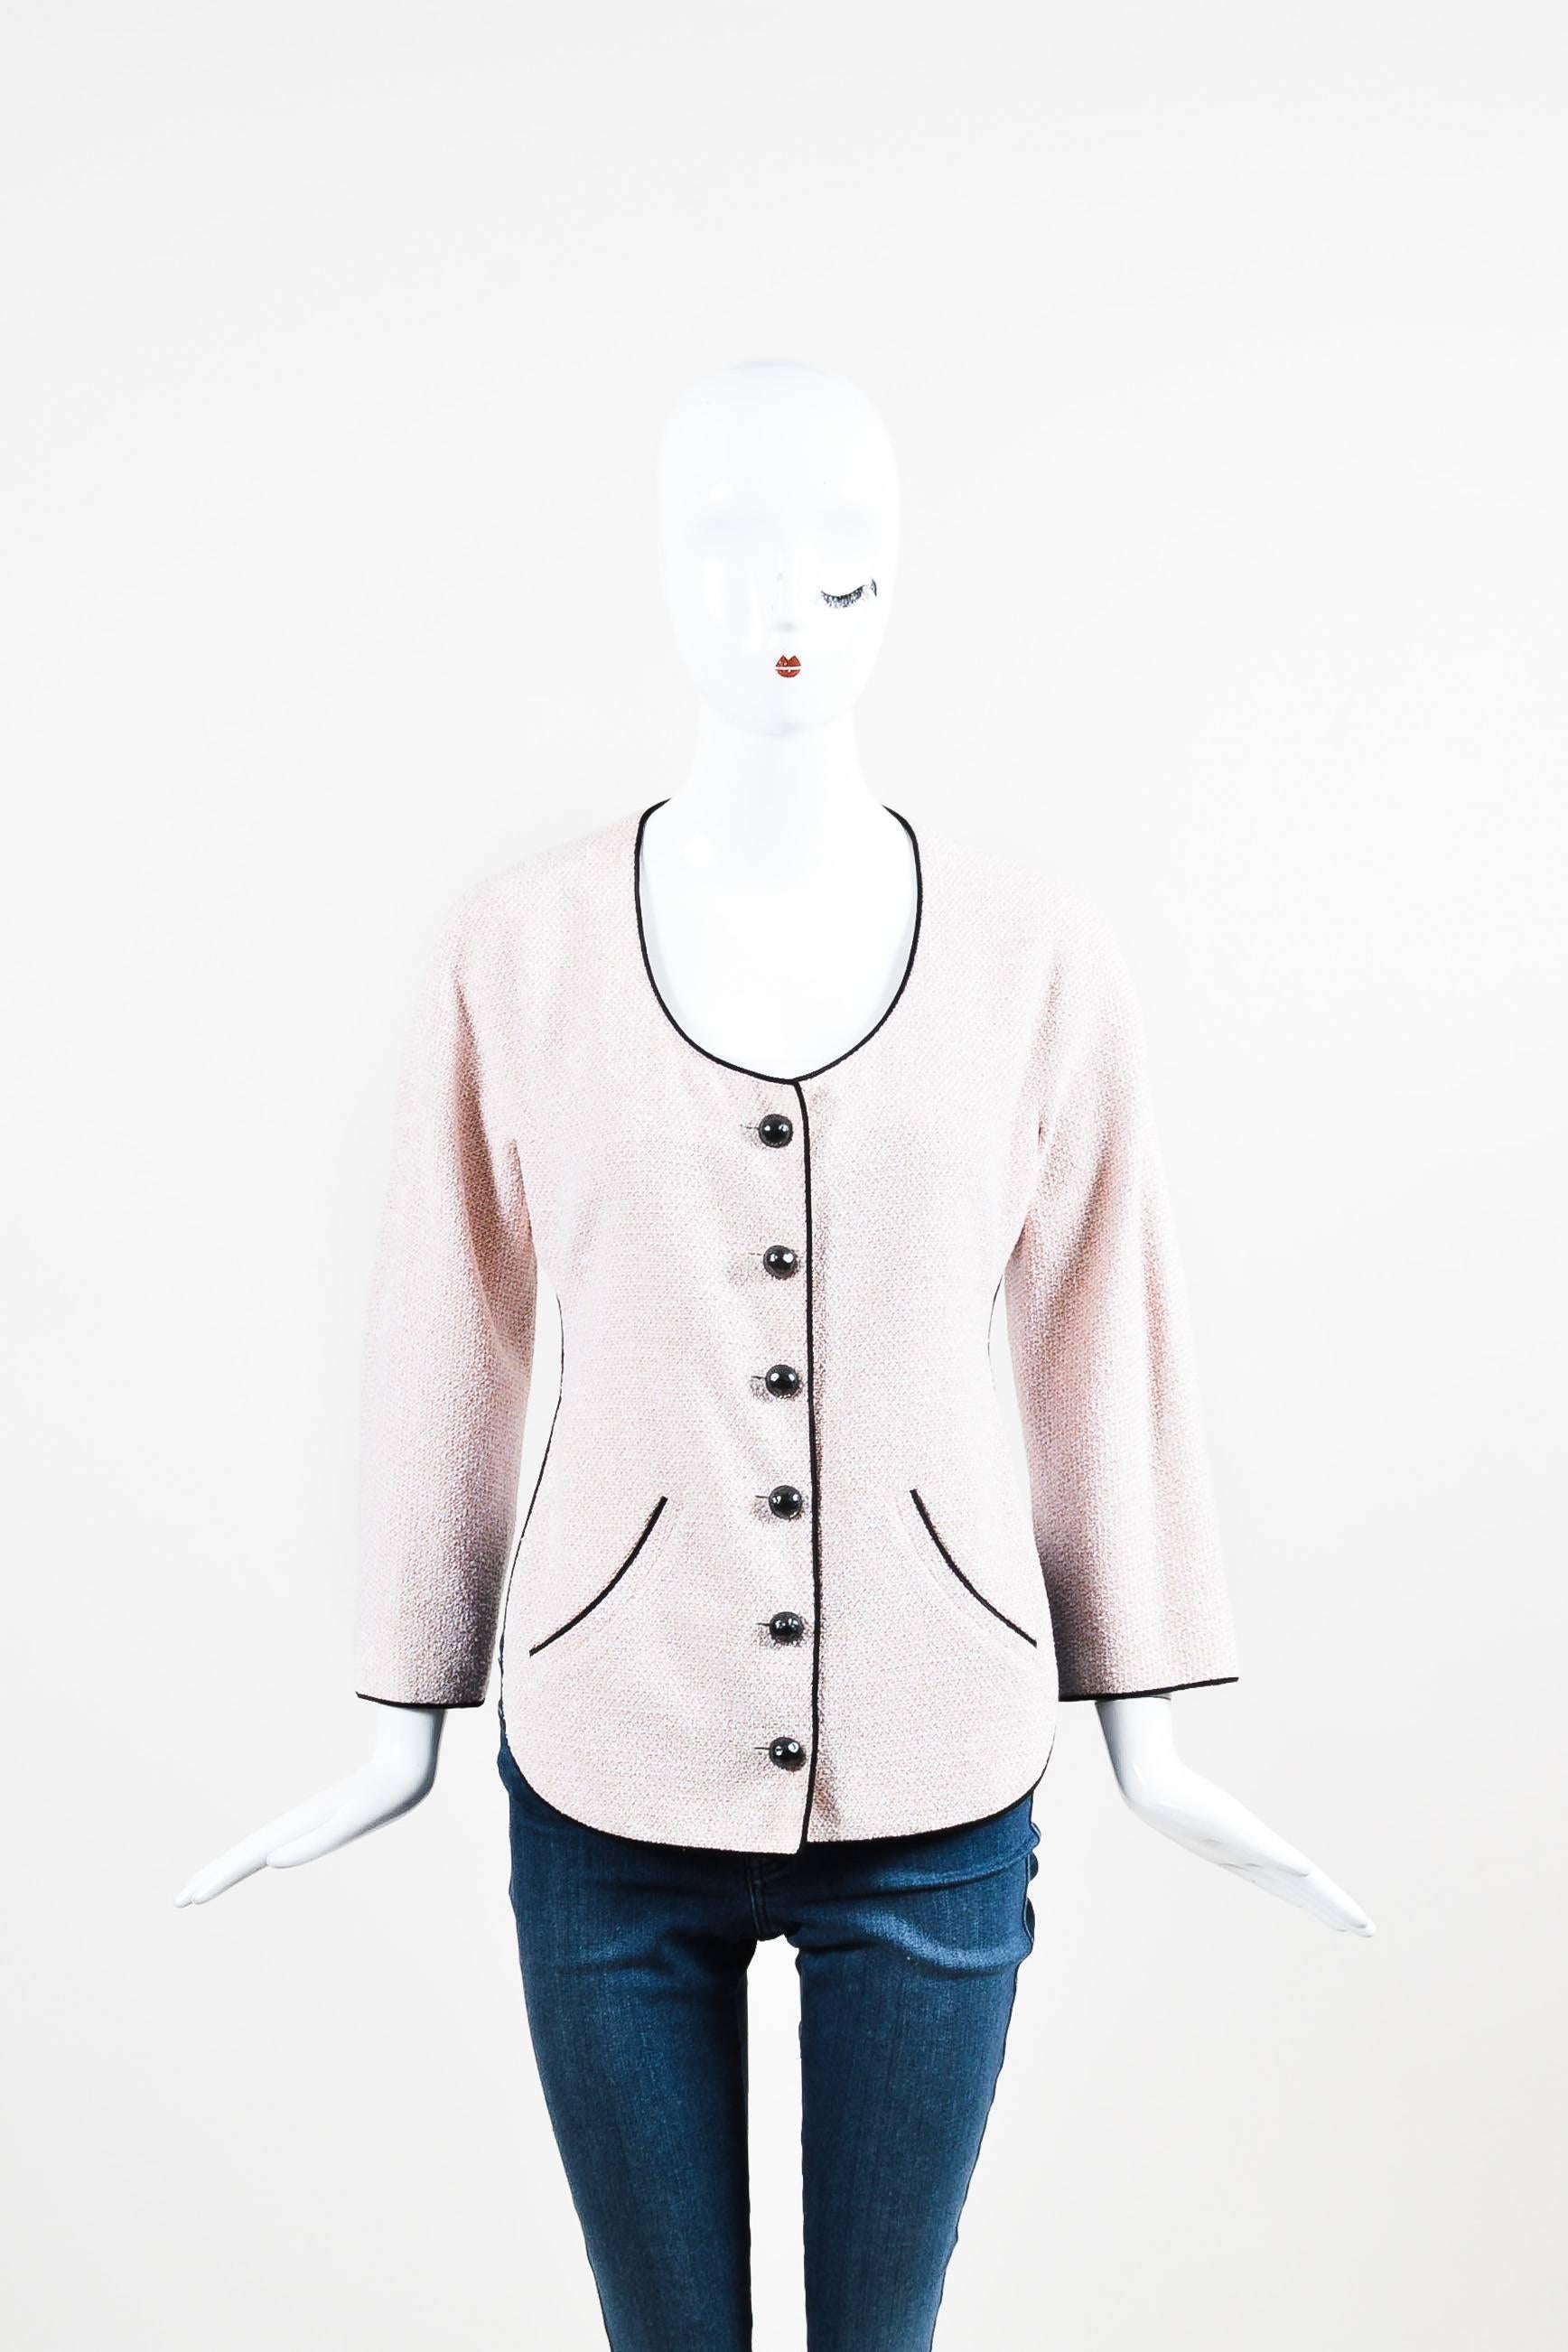 Feminine and unique jacket by Chanel. Light pink tweed with solid black, satin trims. This fun design features an open back with a tie across. Button front closure with 